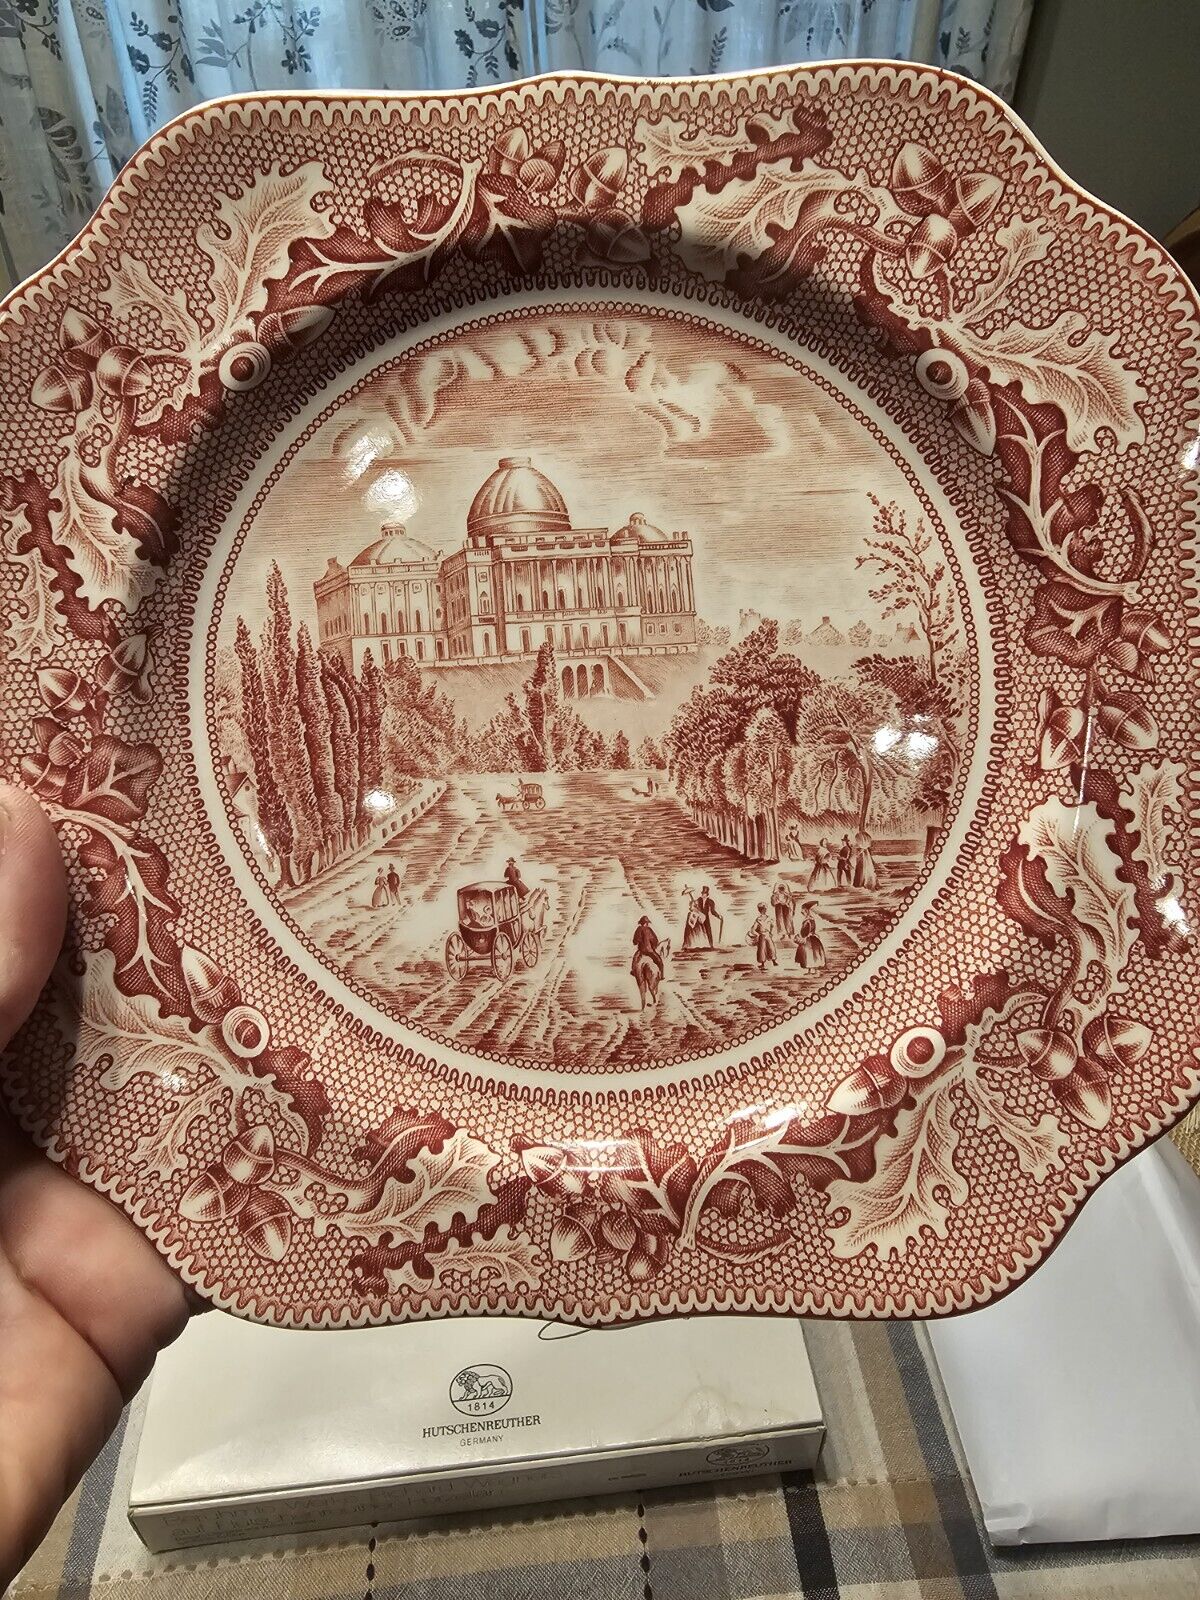 Historical Plate Of America